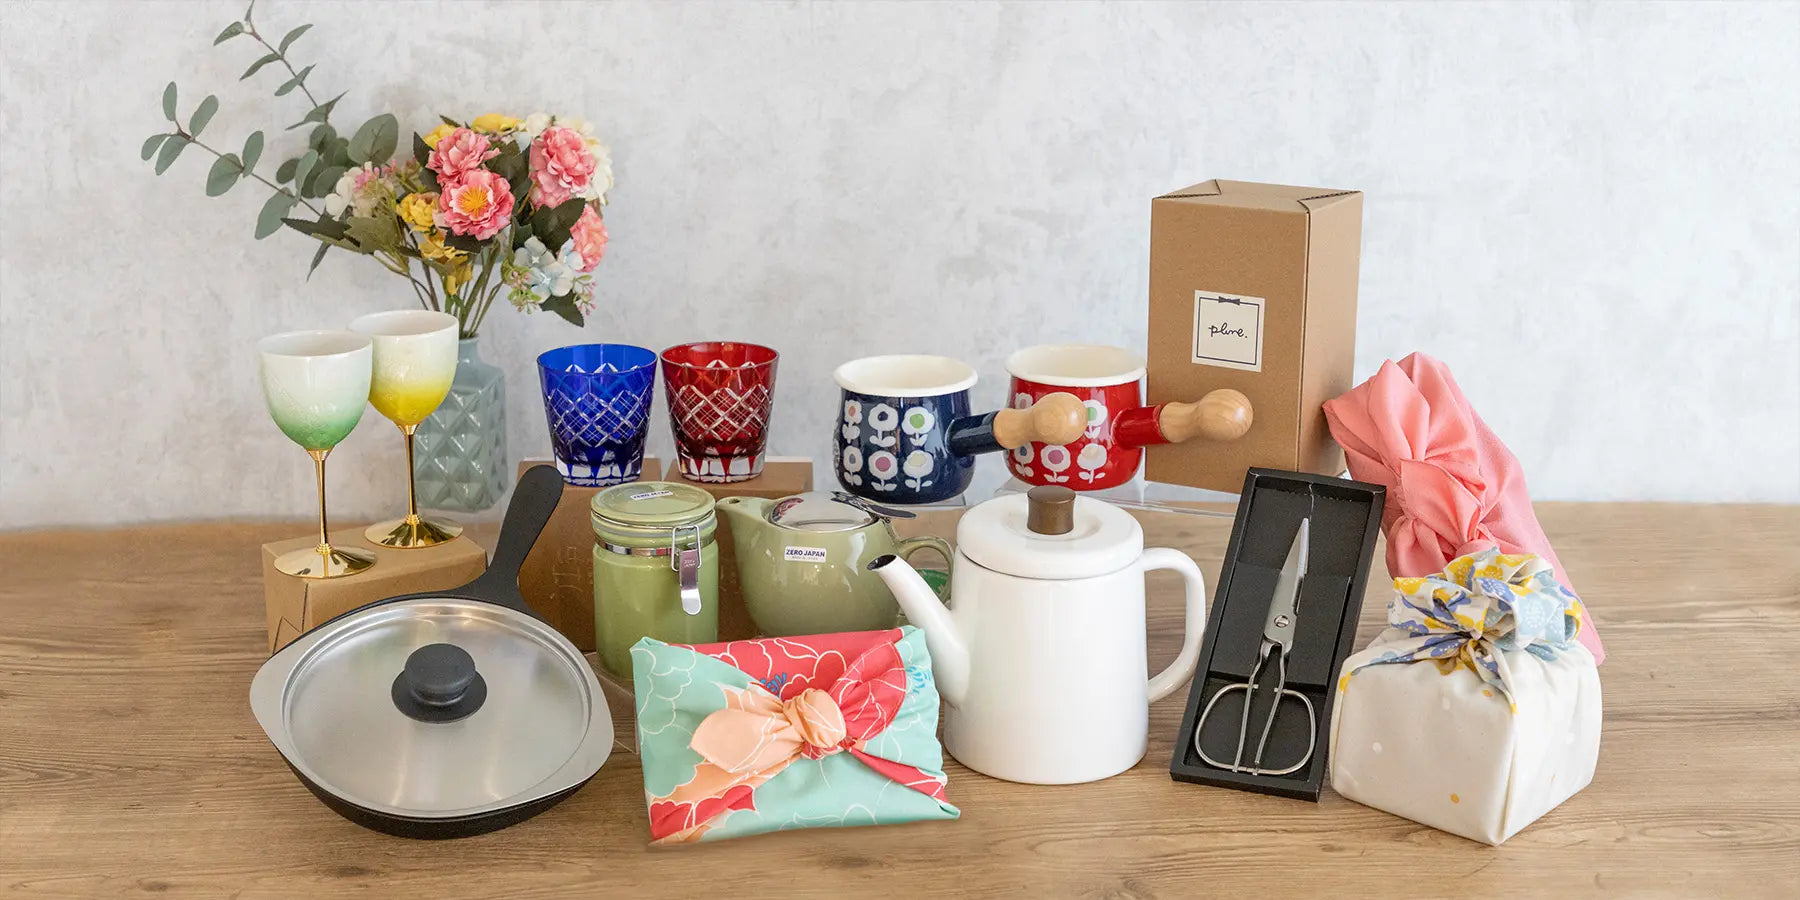 Discover our great selection of Gift Ideas at Globalkitchen Japan.